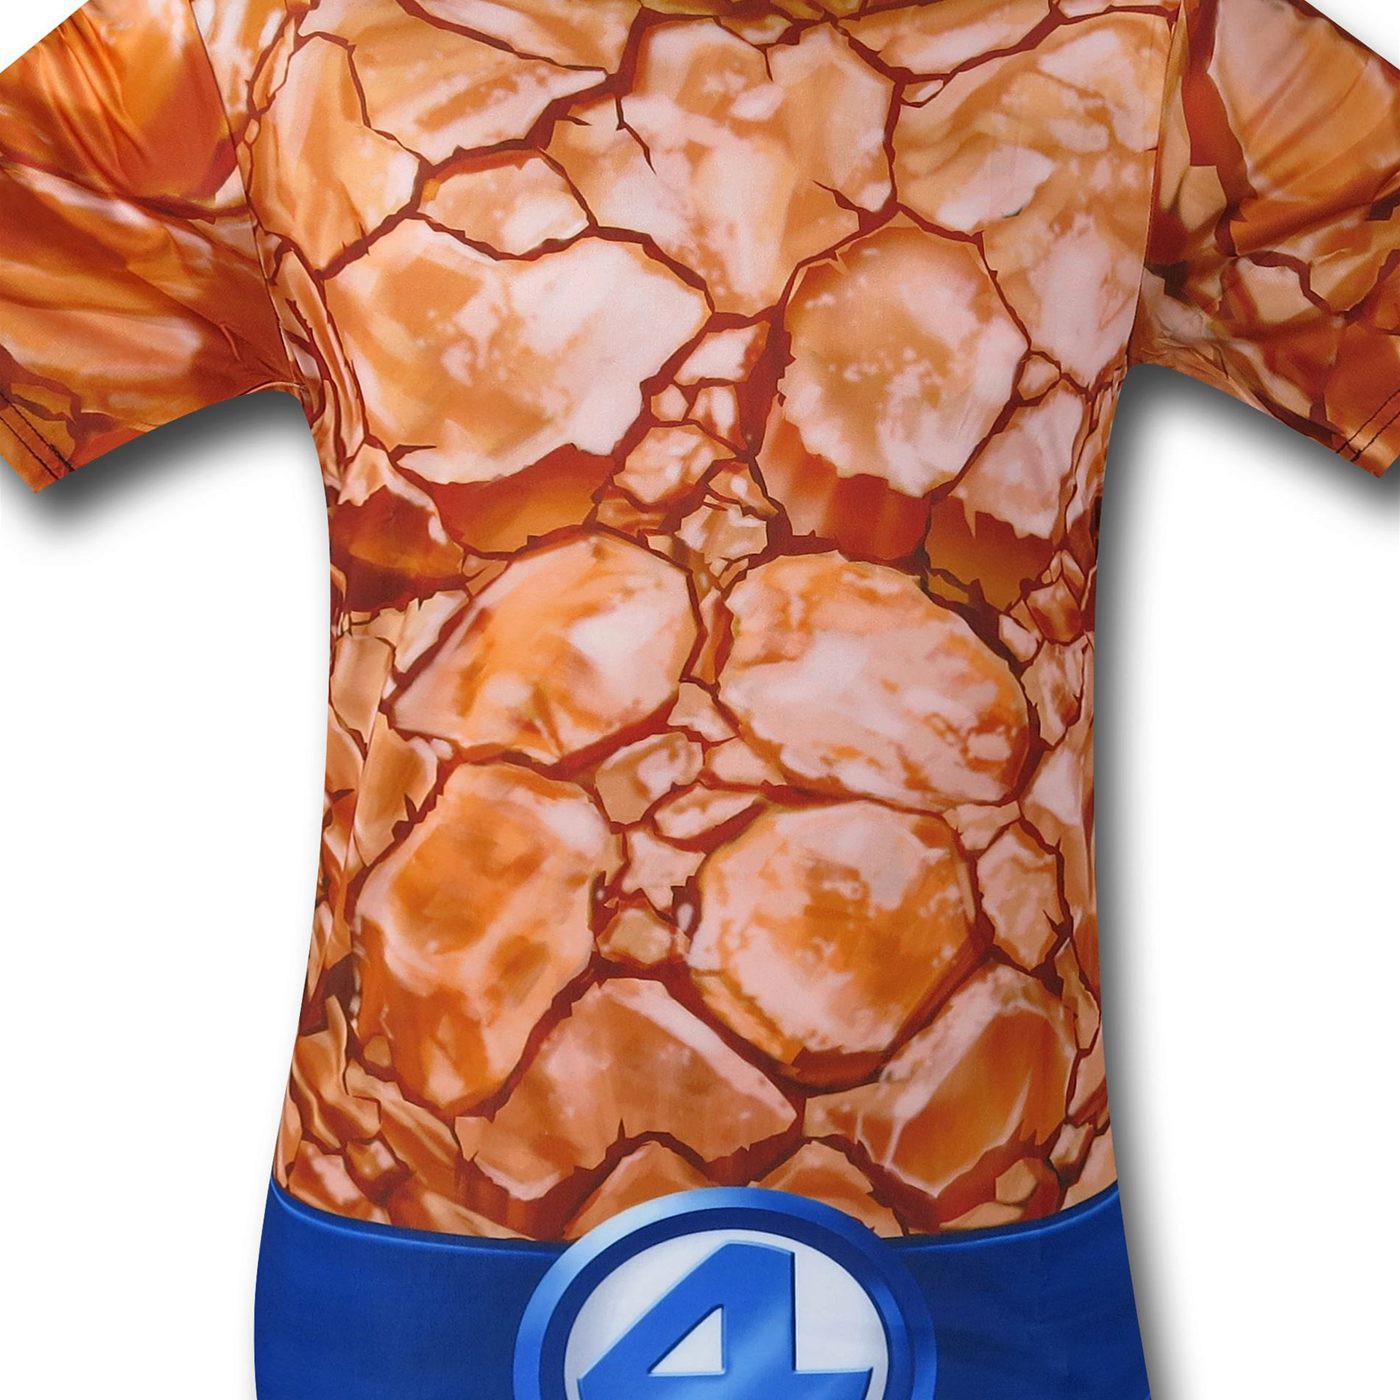 Thing Sublimated Costume Fitness T-Shirt